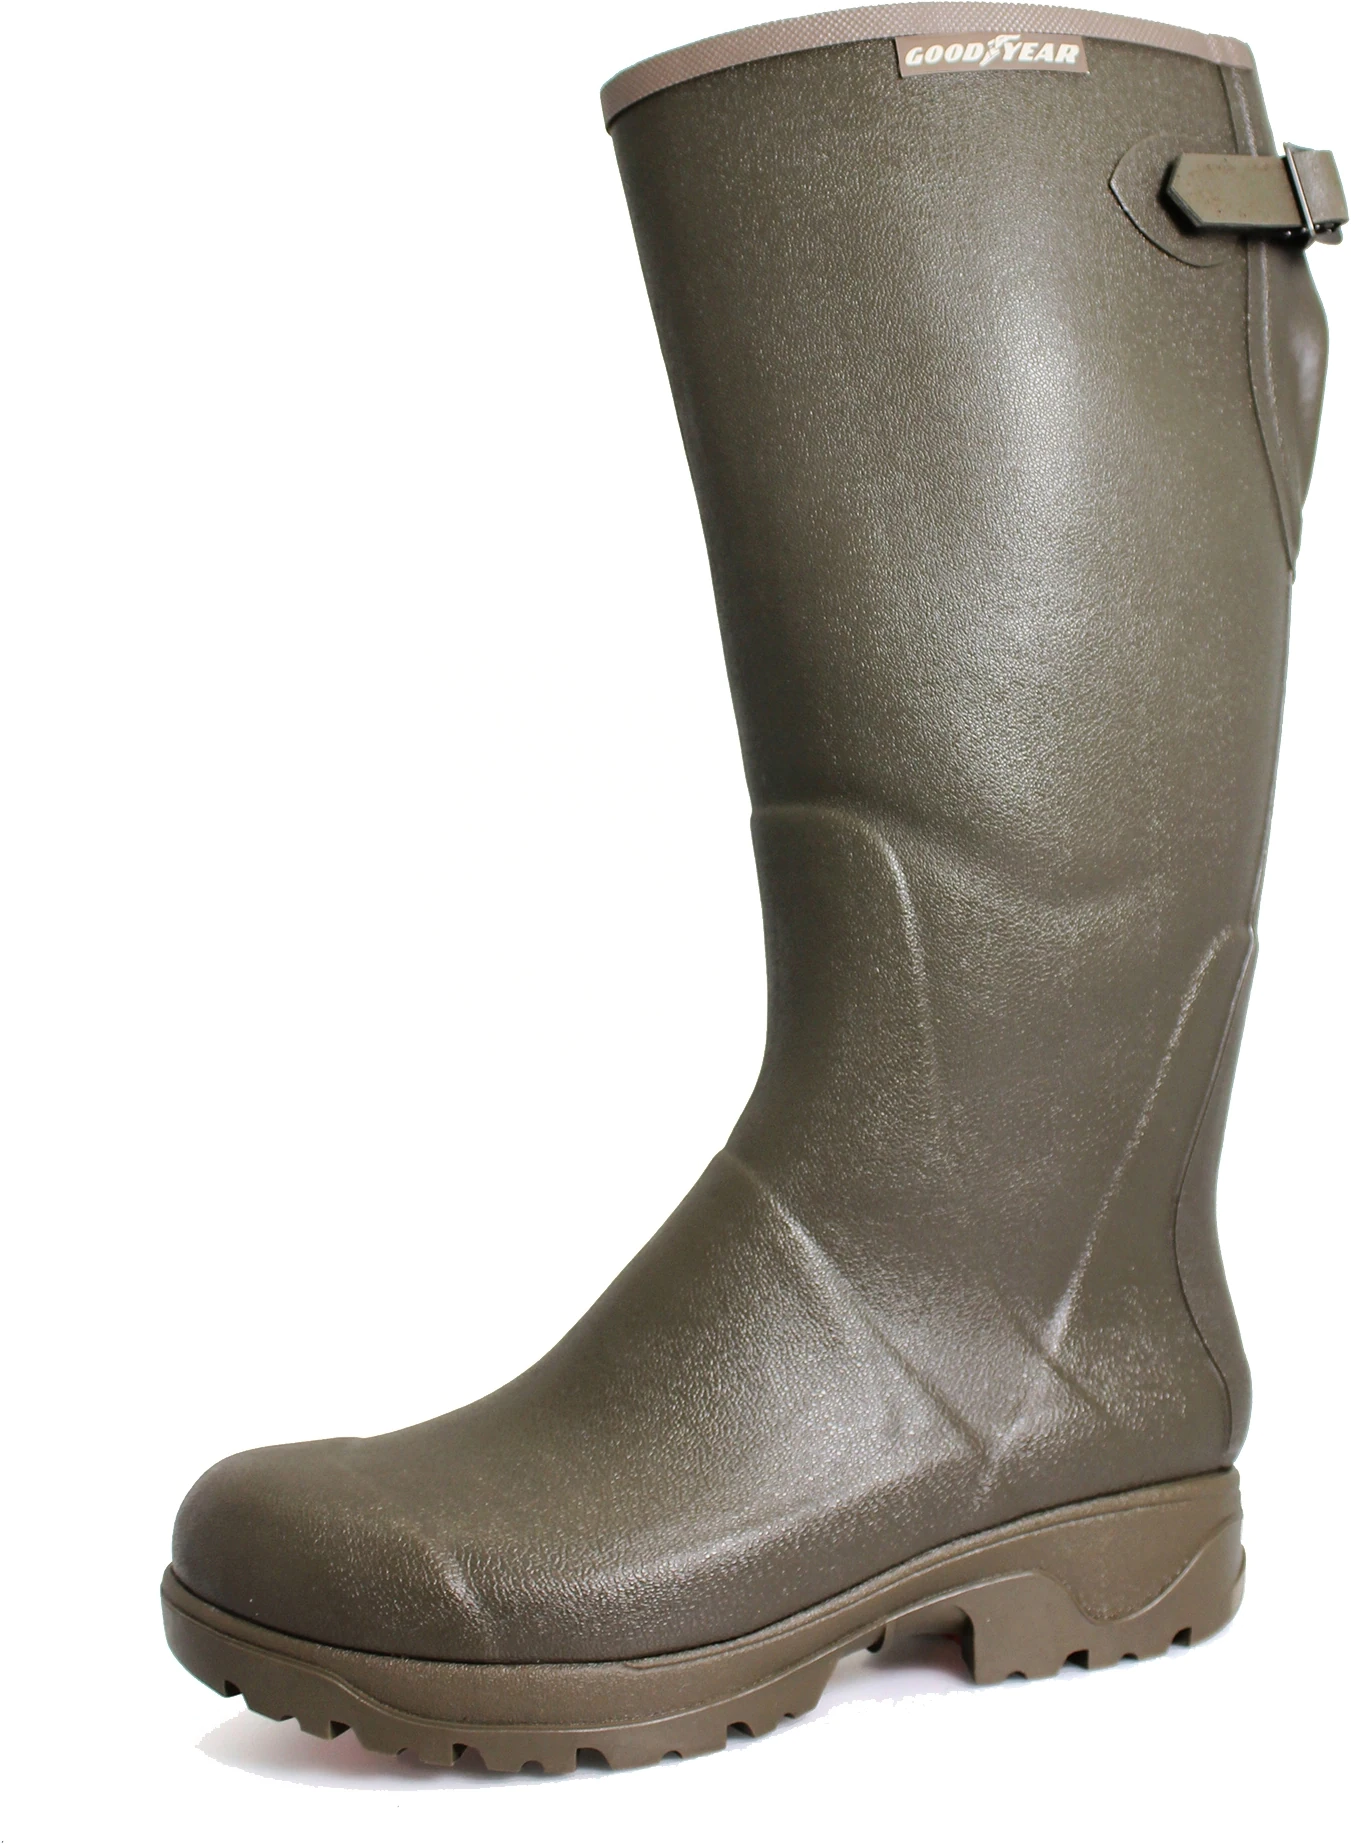 Goodyear Rubber Boots Stream